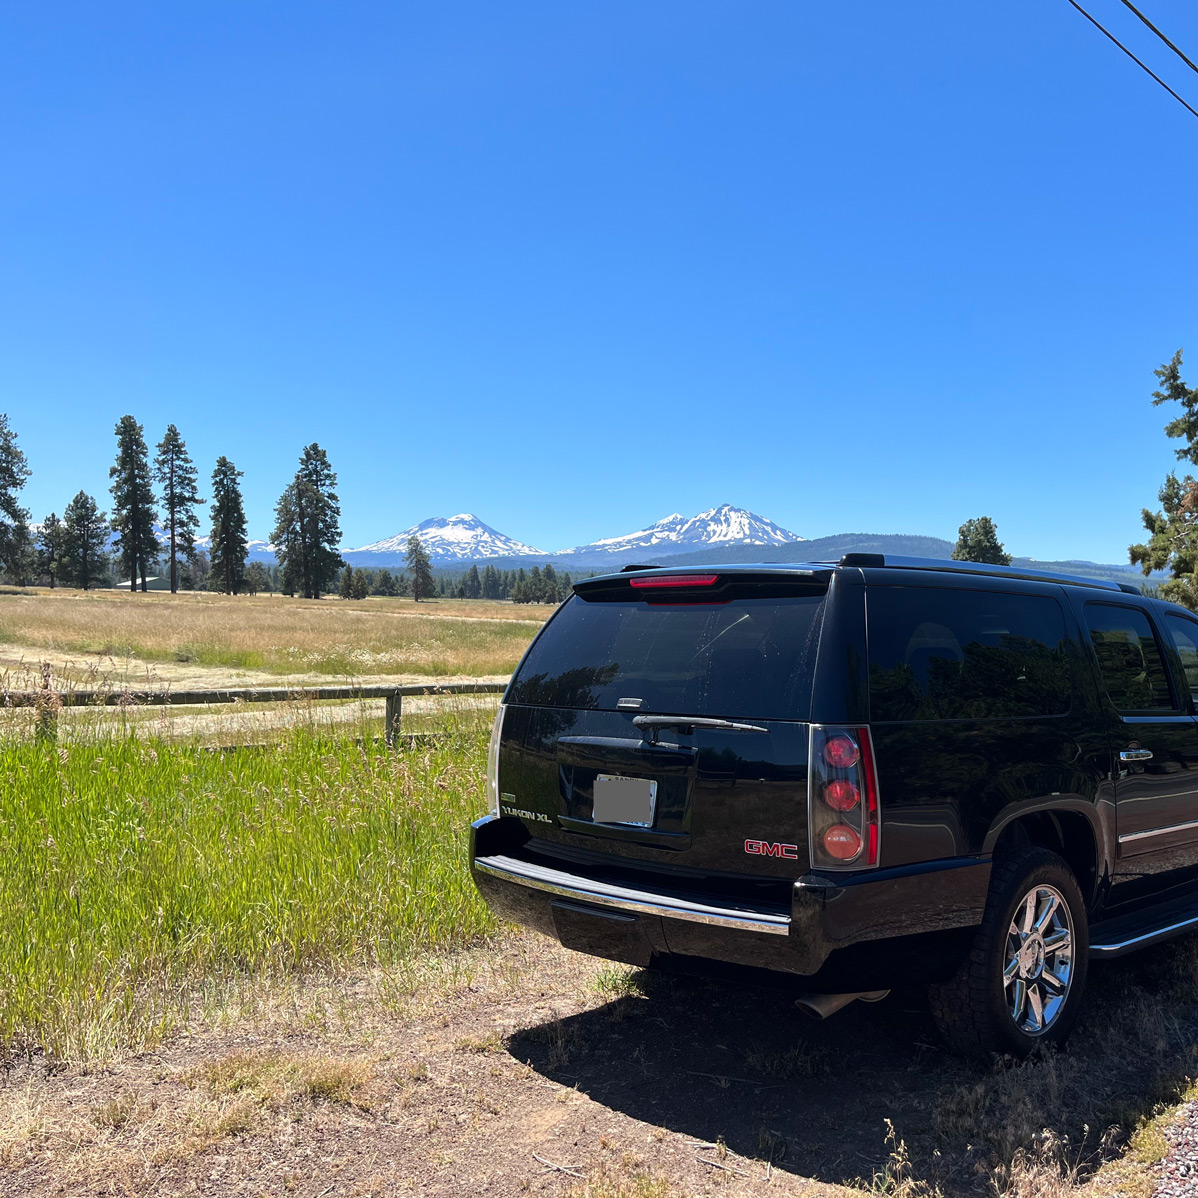 SUV parked on gravel road with mountains in the distance beneath a clear blue sky